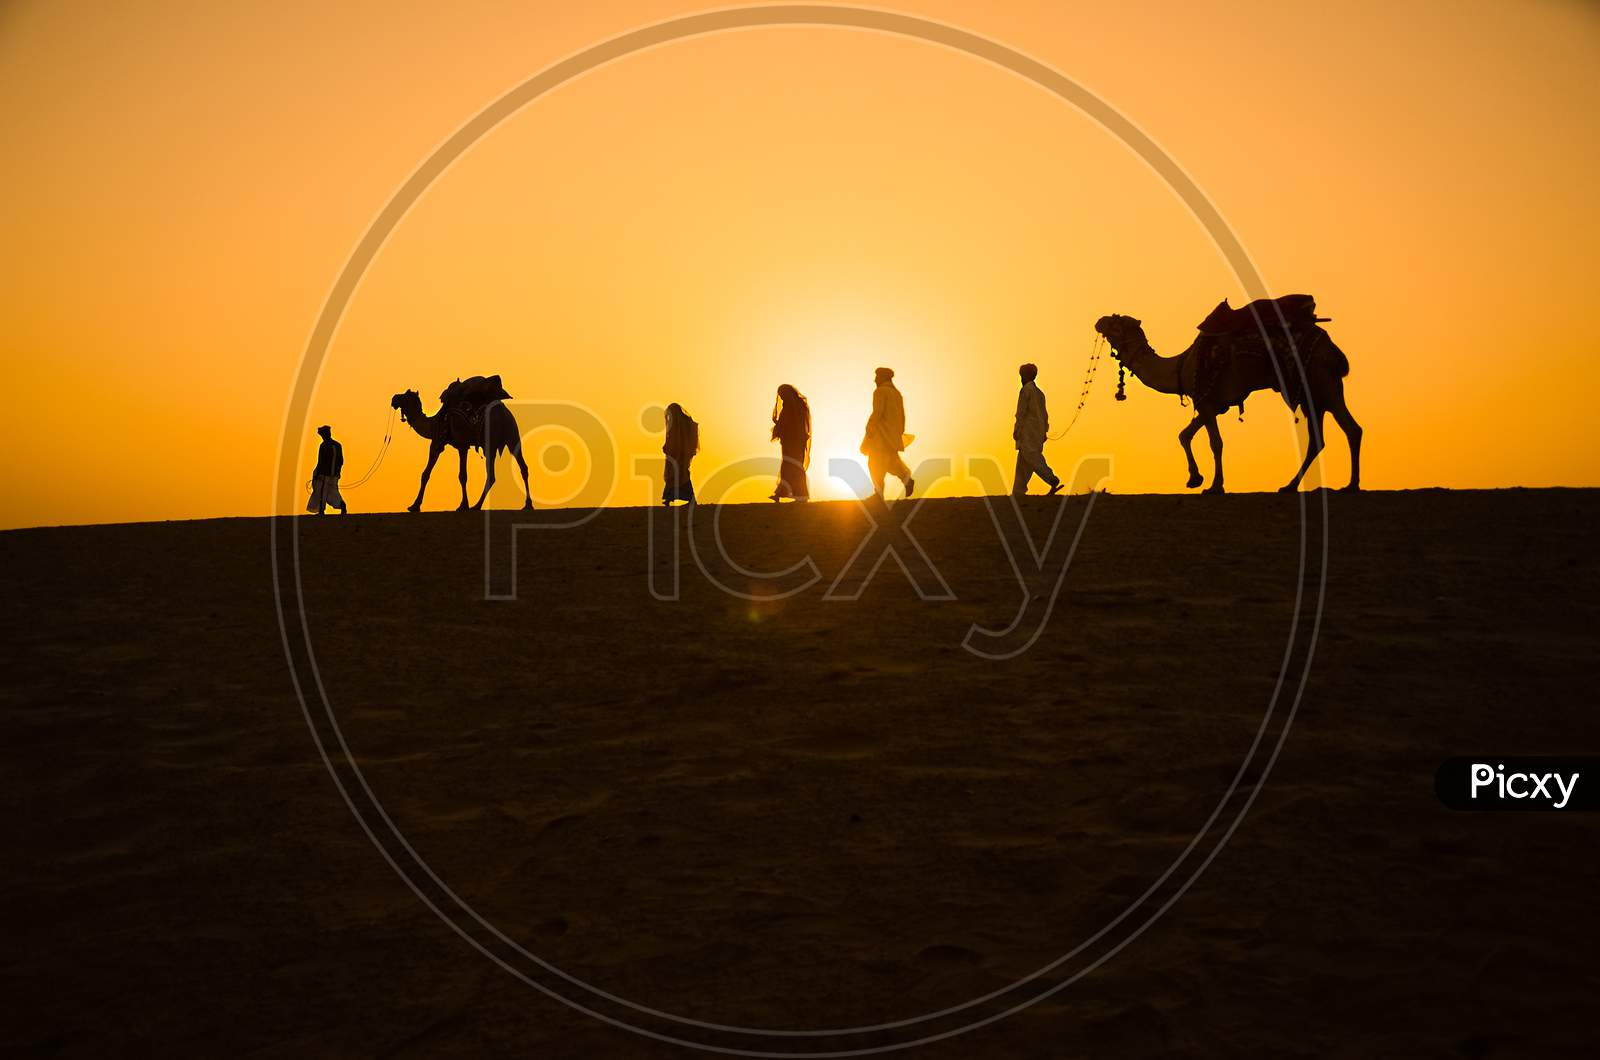 Rajasthan Travel Background - Indian Cameleers (Camel Drivers) With Camels Silhouettes In Dunes Of Thar Desert On Sunset. Jaisalmer, Rajasthan, India